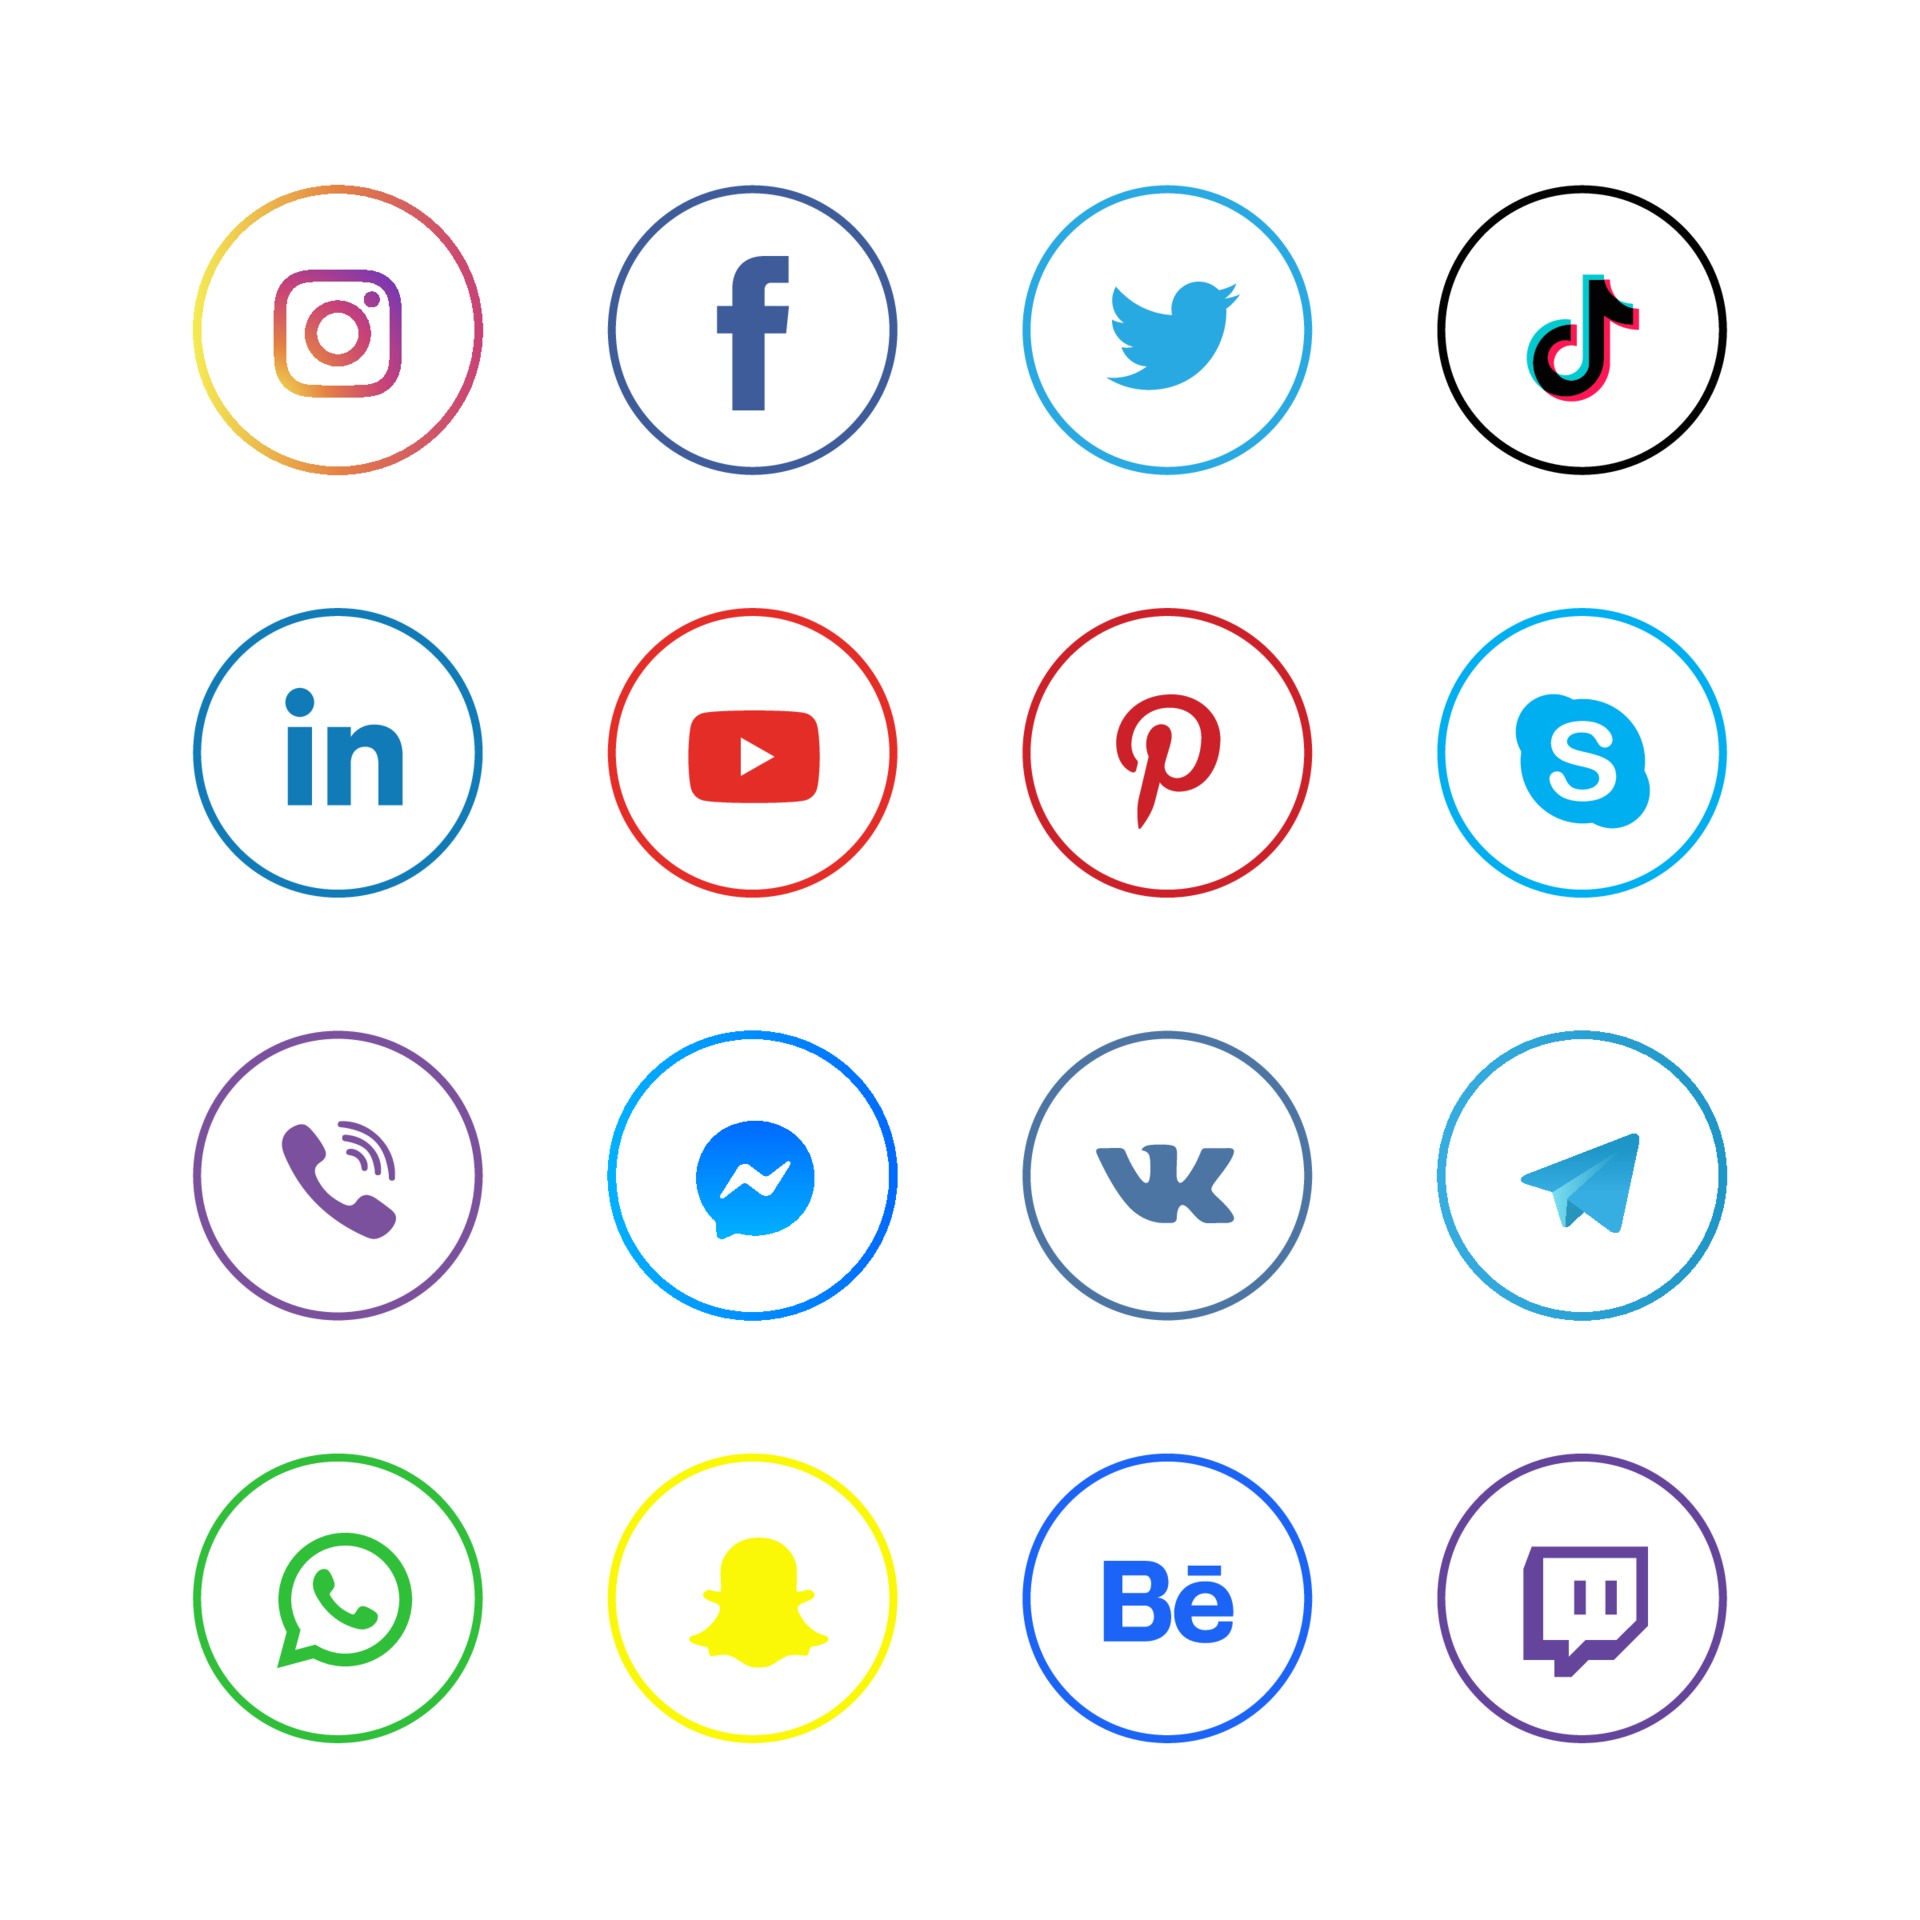 Minimal Social Media Icons Vector Art, Icons, and Graphics for Free